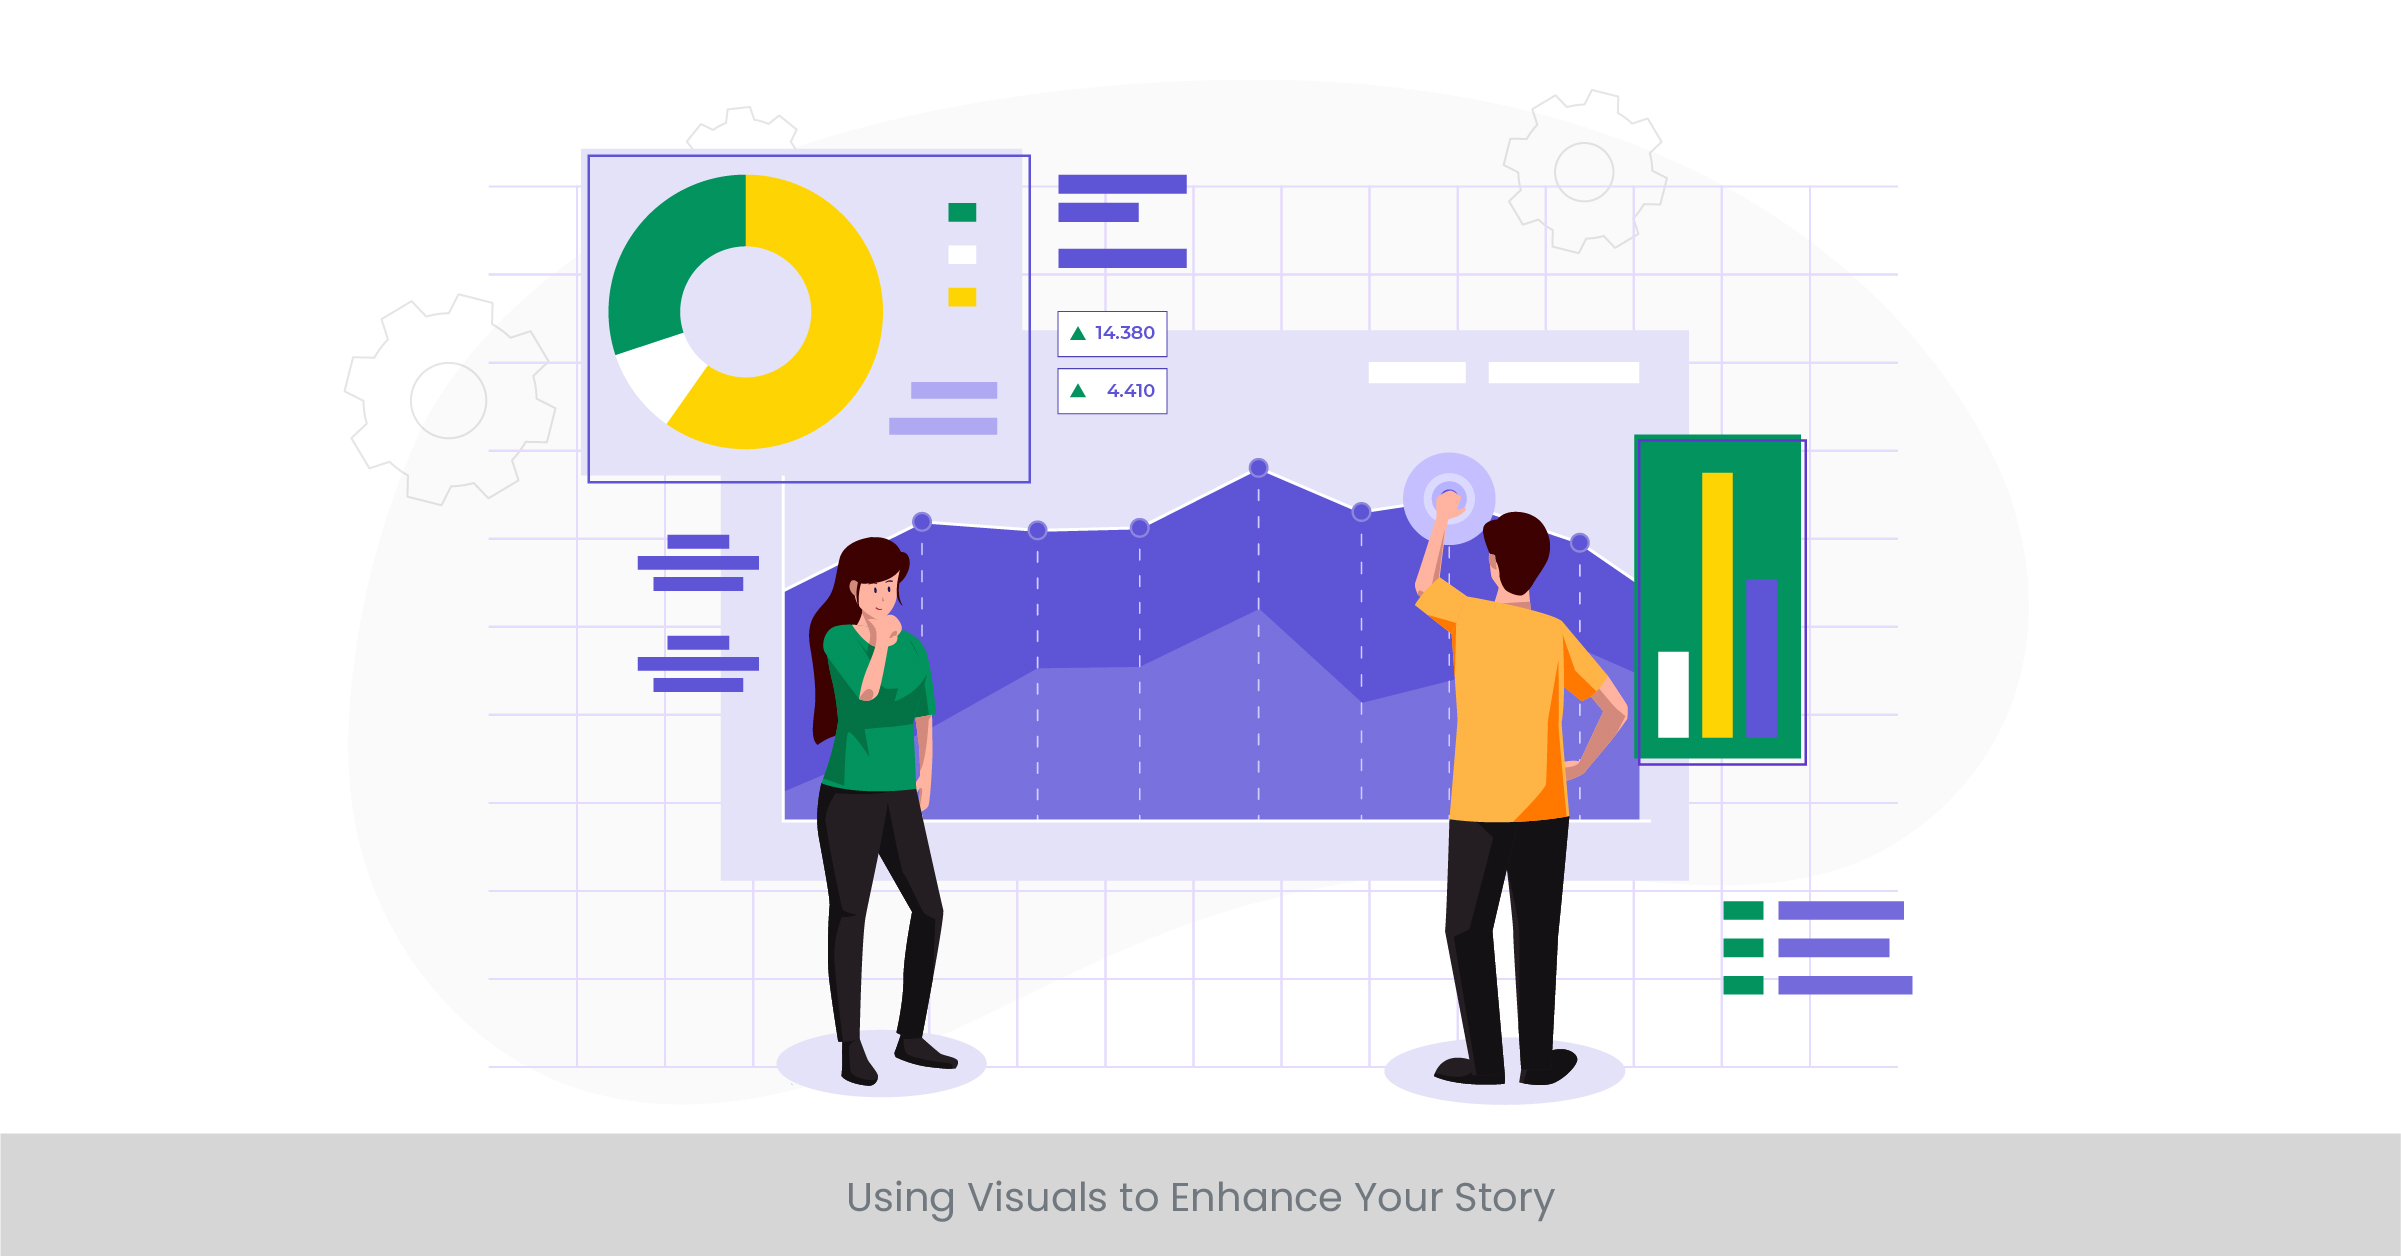 Using Visuals to Enhance Your Story